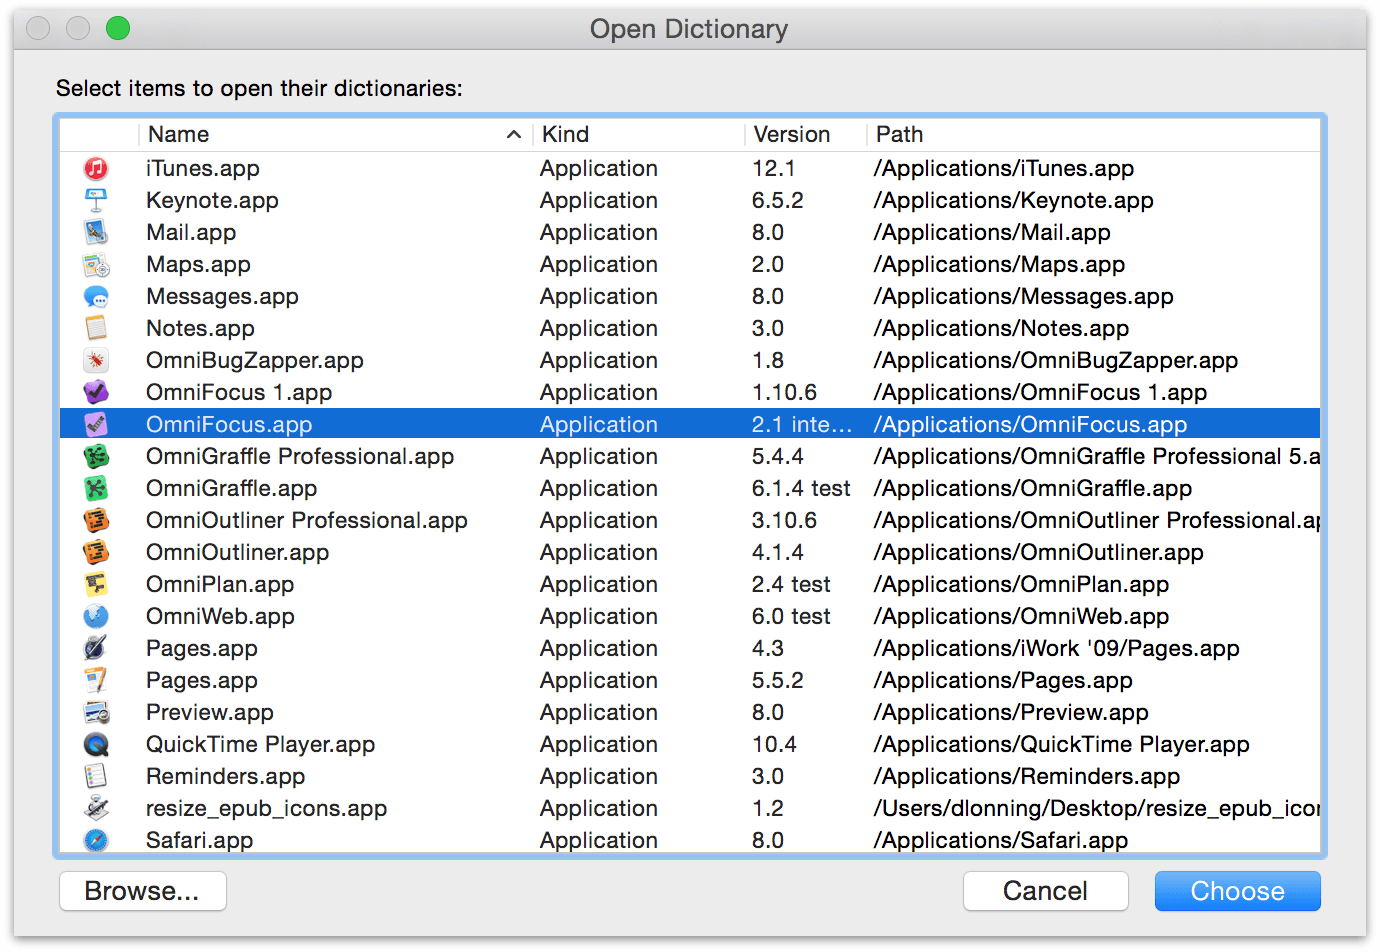 Locate OmniFocus.app in the Open Dictionary window and then click Choose